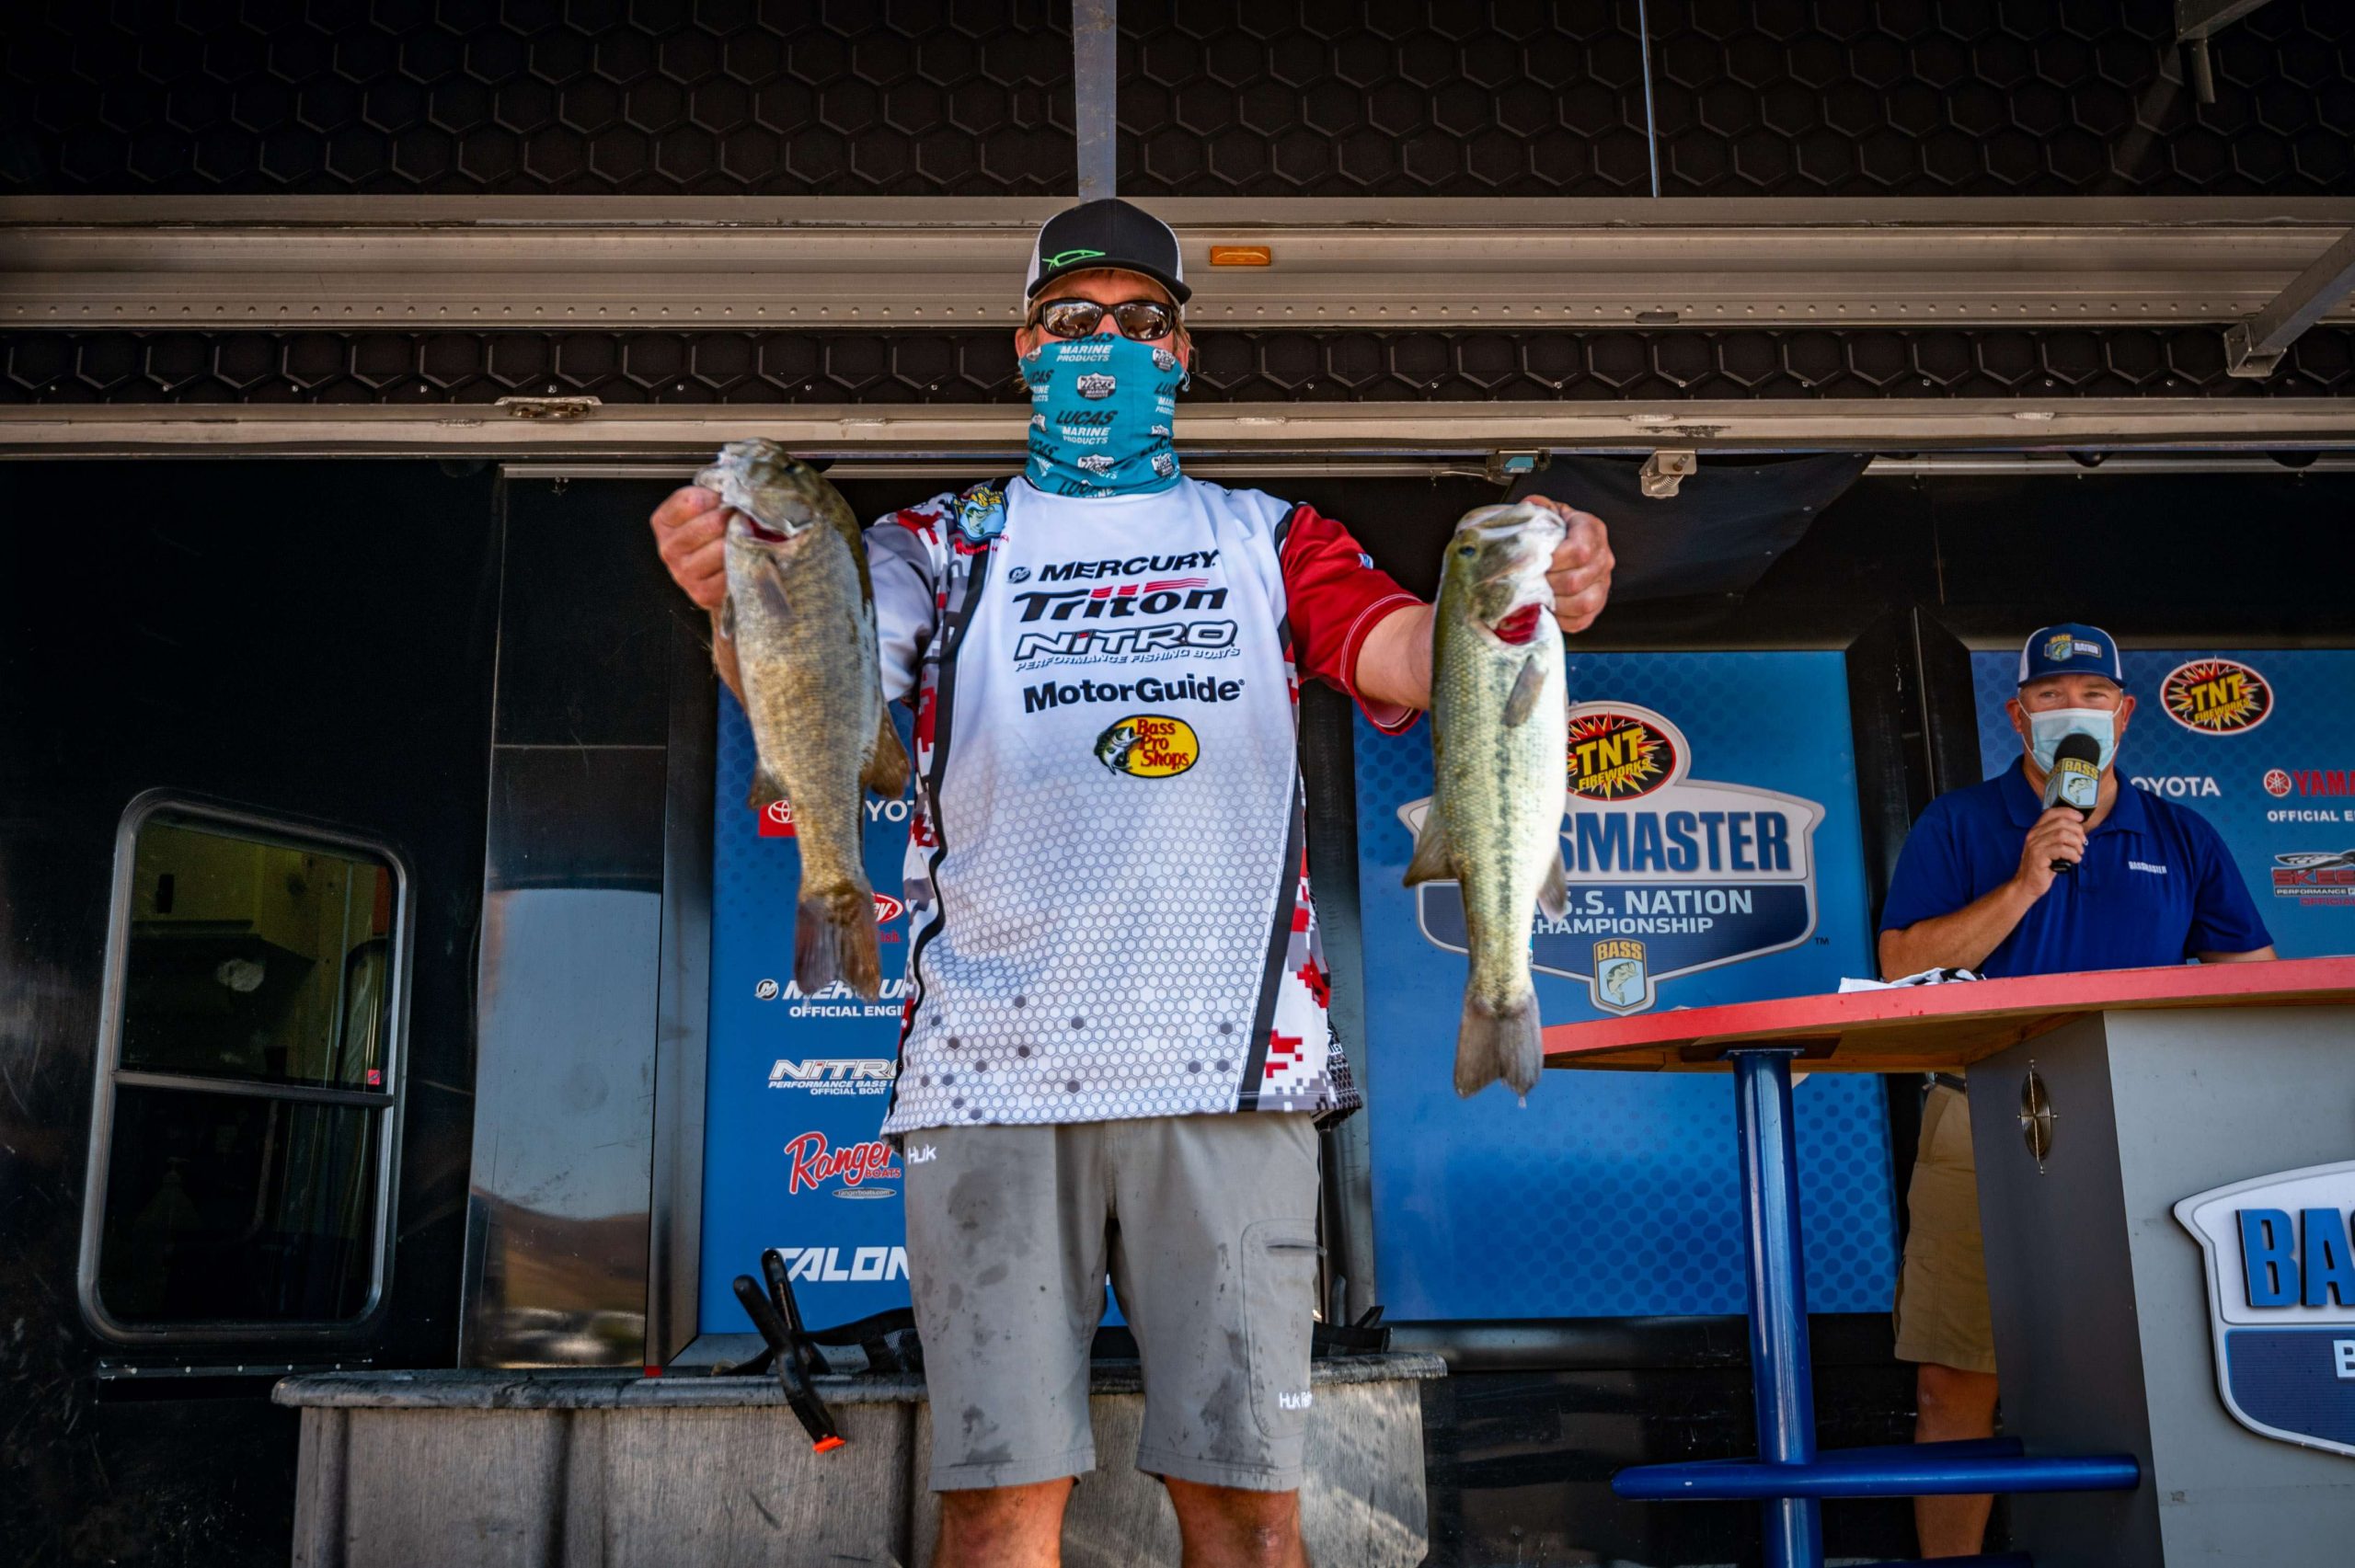 Justin Hicks, UTAH, takes the lead on day 1 here at the 2020 TNT Fireworks B.A.S.S. National Western Regional at Lake Mead with 10-5.